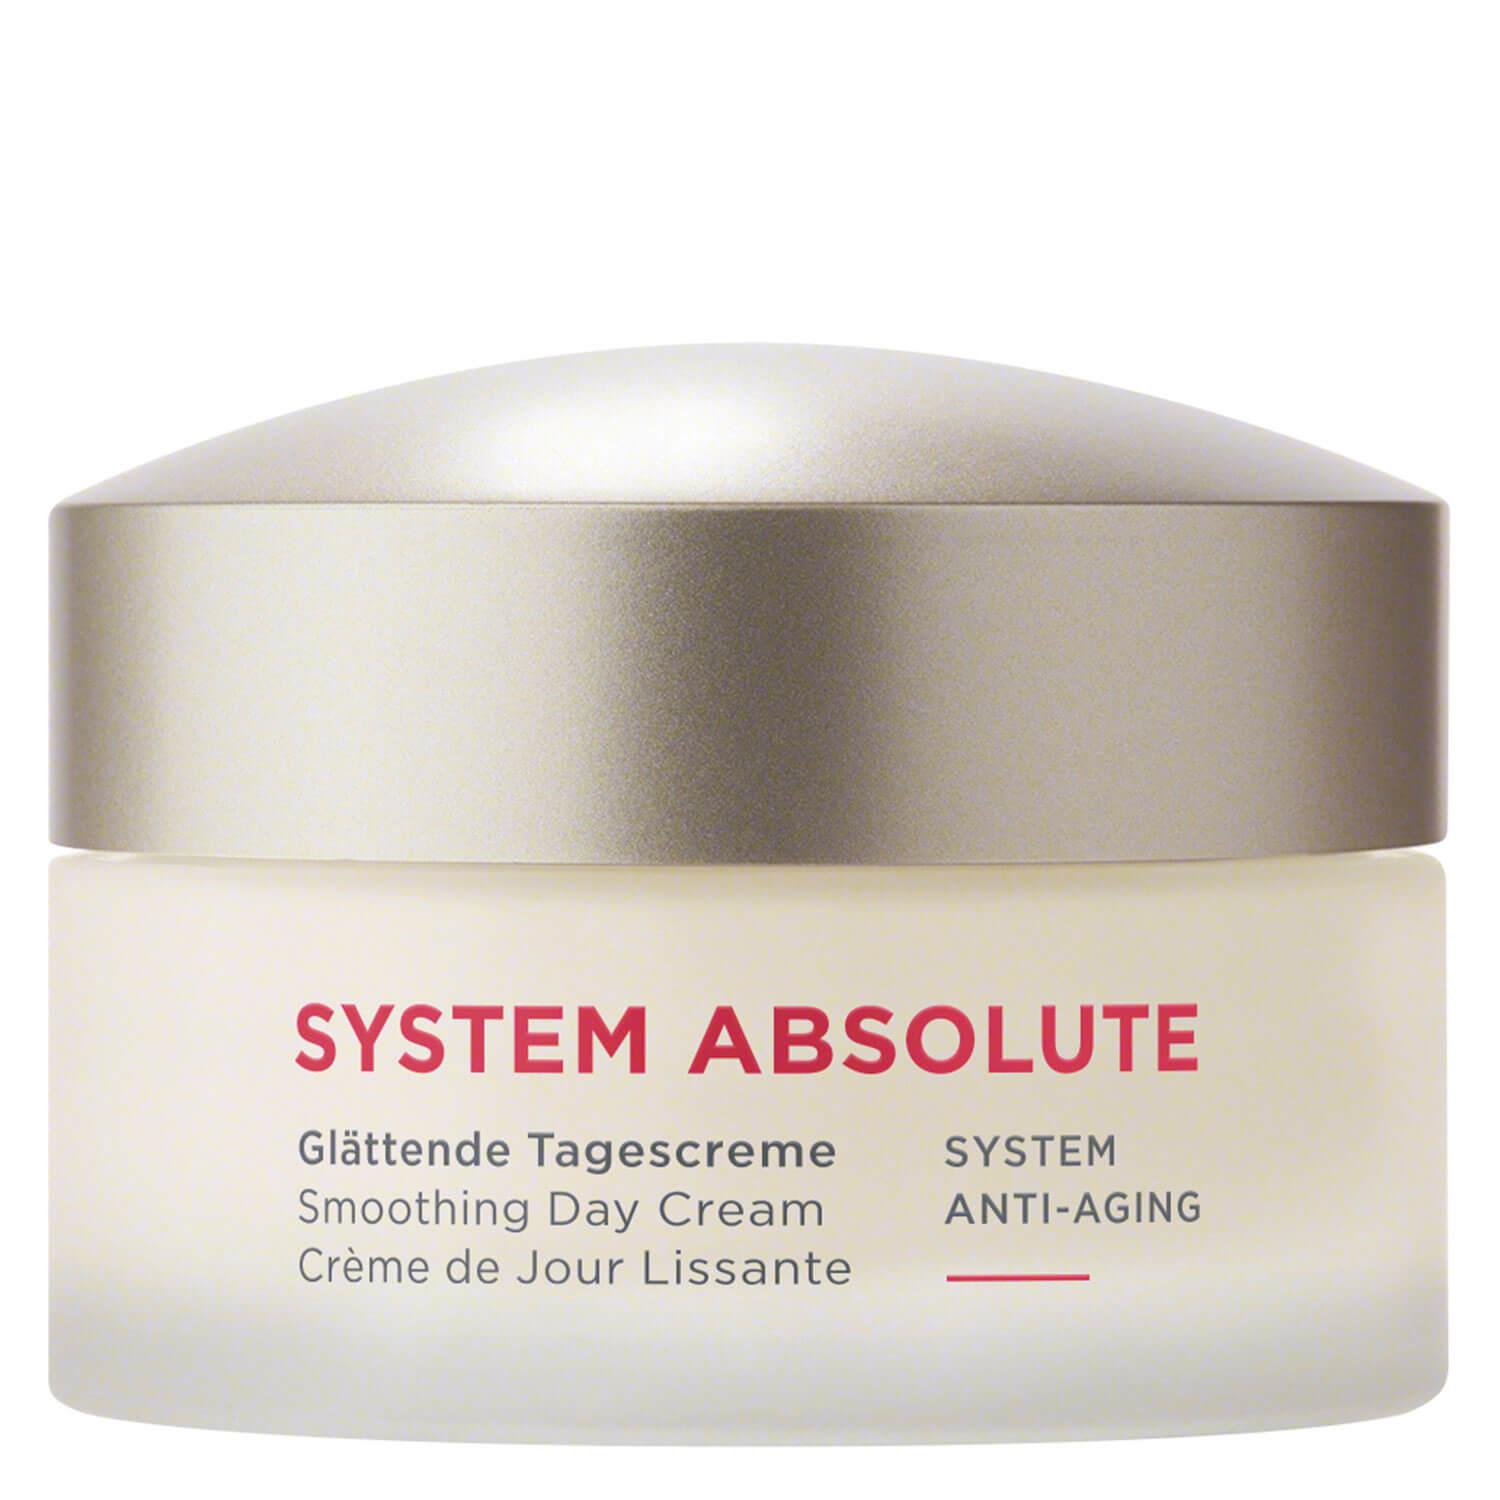 System Absolute - Anti-Aging Glättende Tagescreme